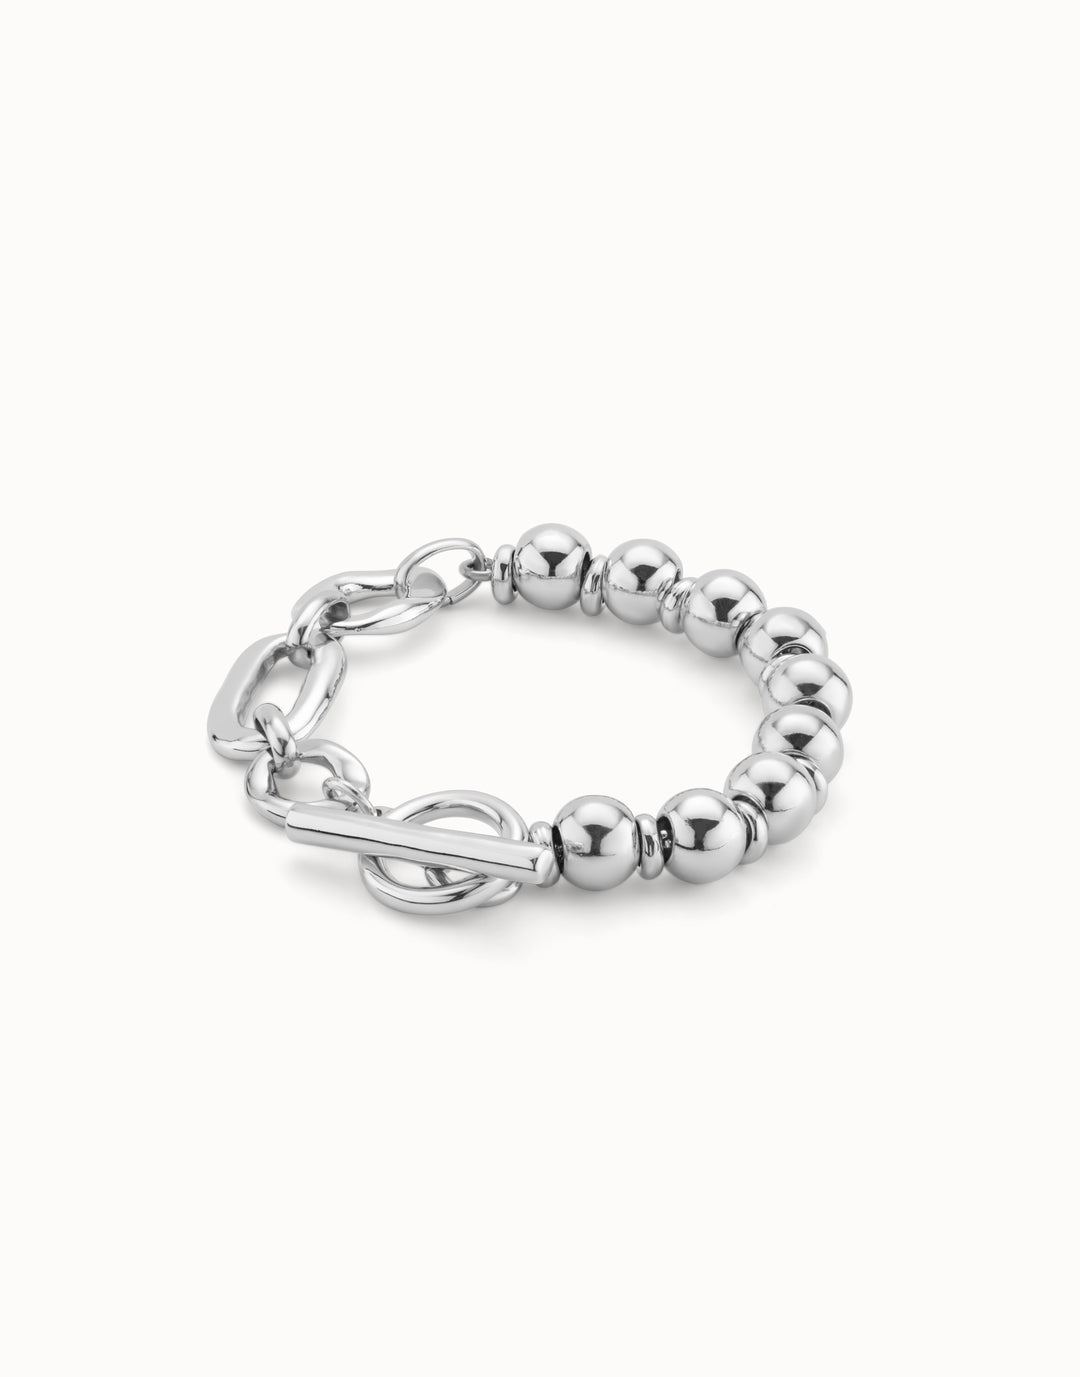 CHEERFUL TOGGLE BRACELET - LARGE - SILVER